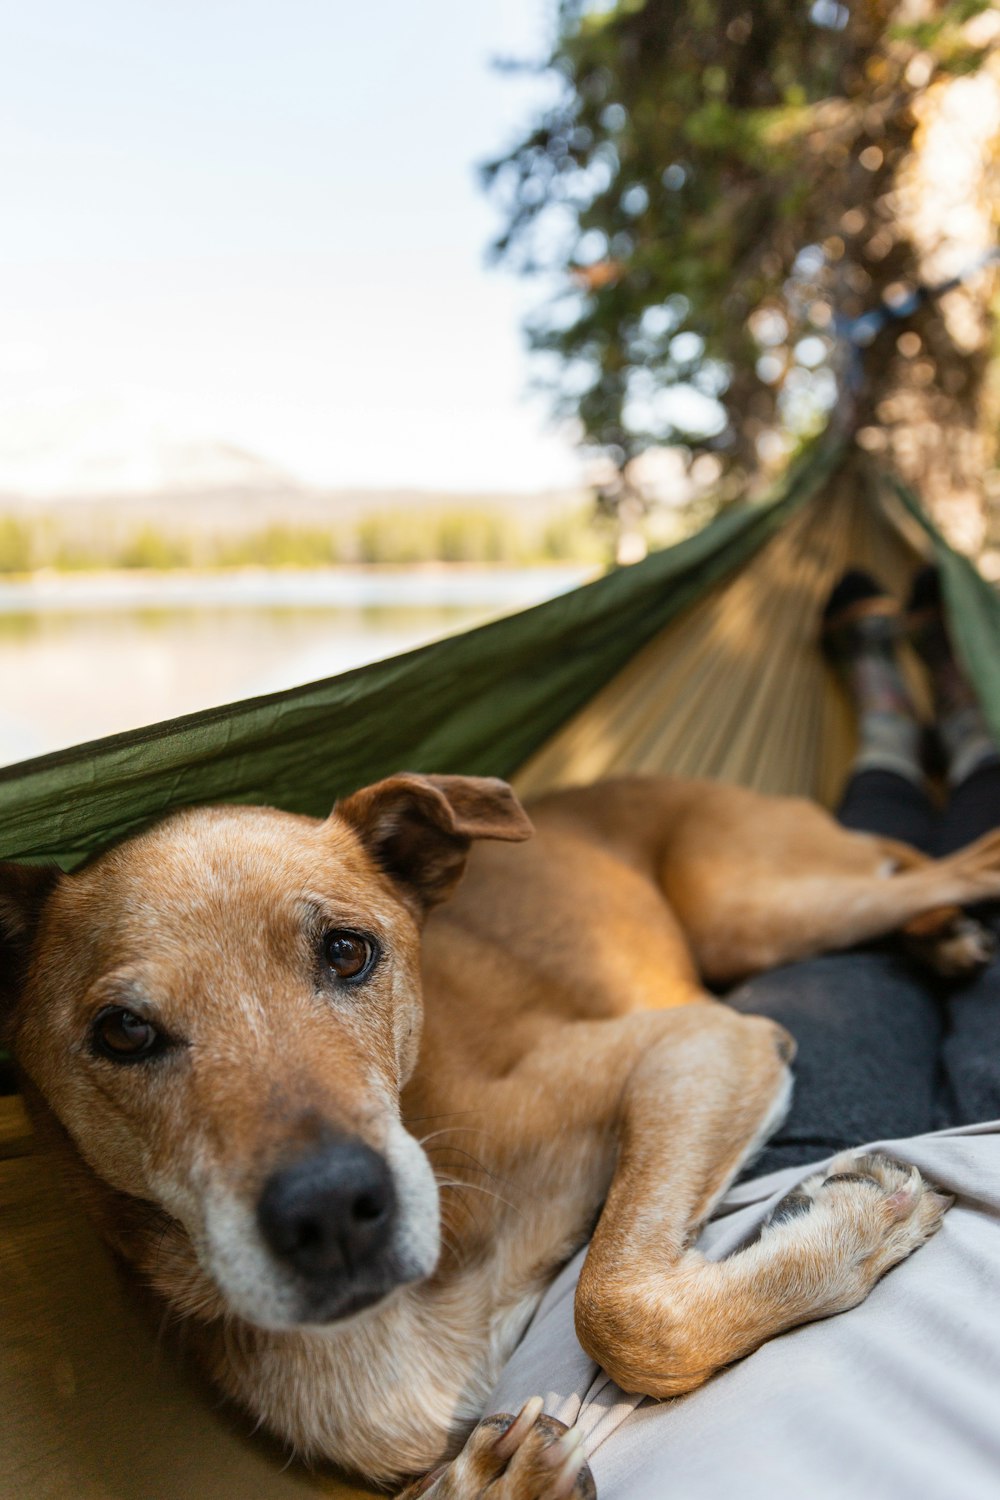 a brown dog laying in a hammock next to a person